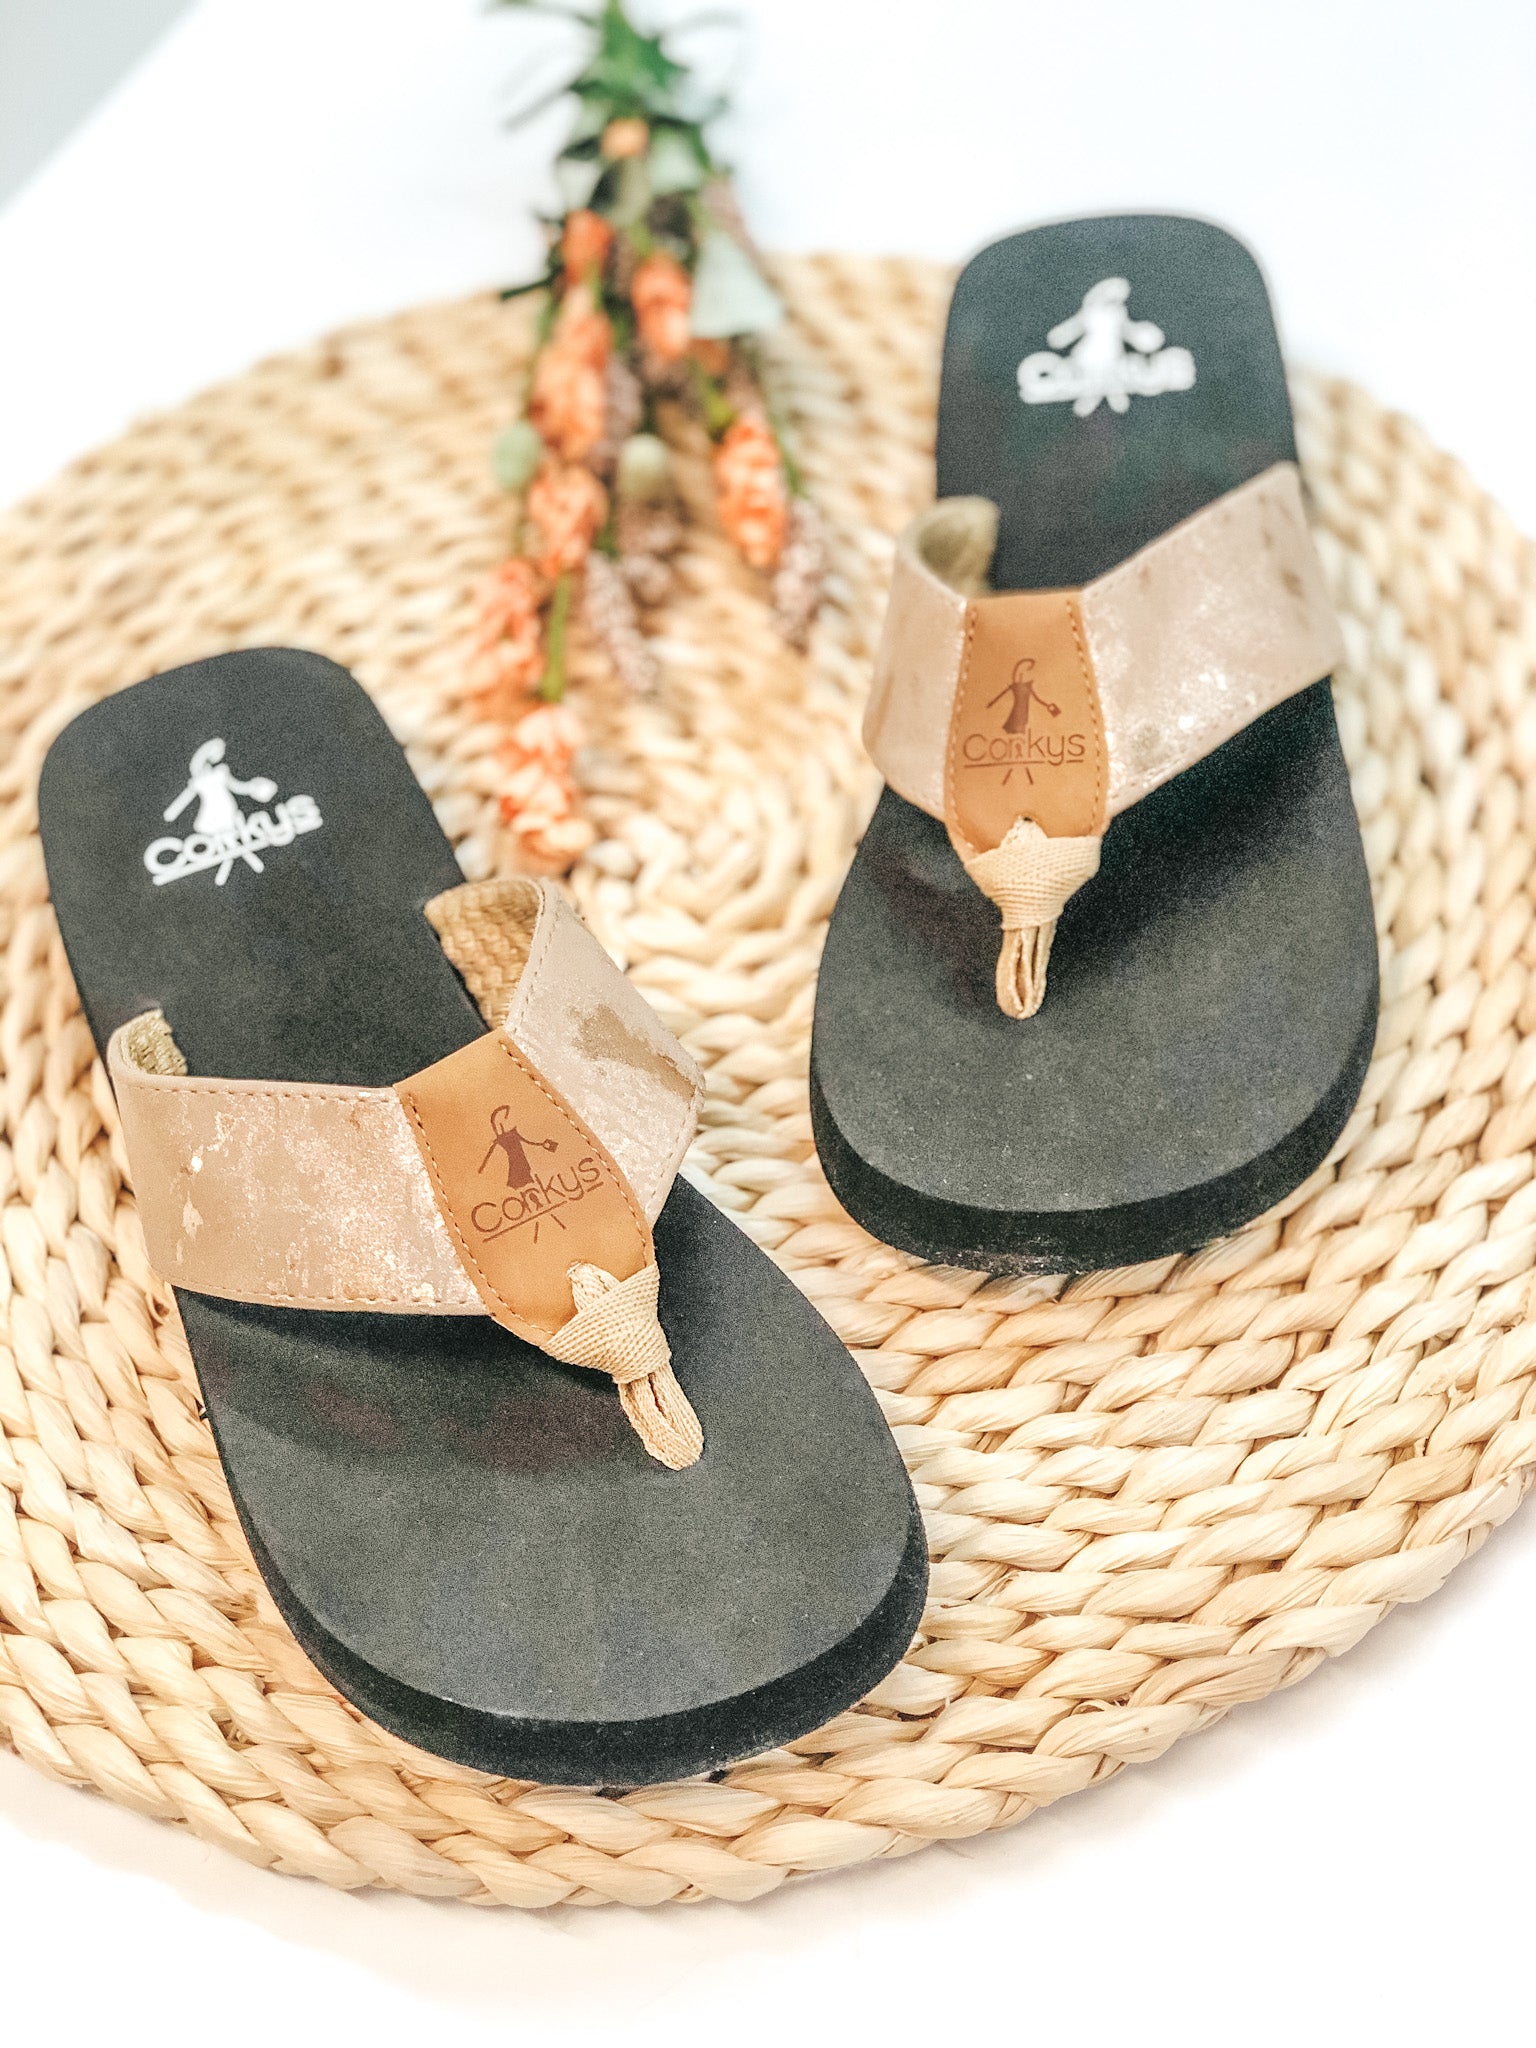 Last Chance Size 6 | Corky's | Clover Cushion Flip Flops in Taupe